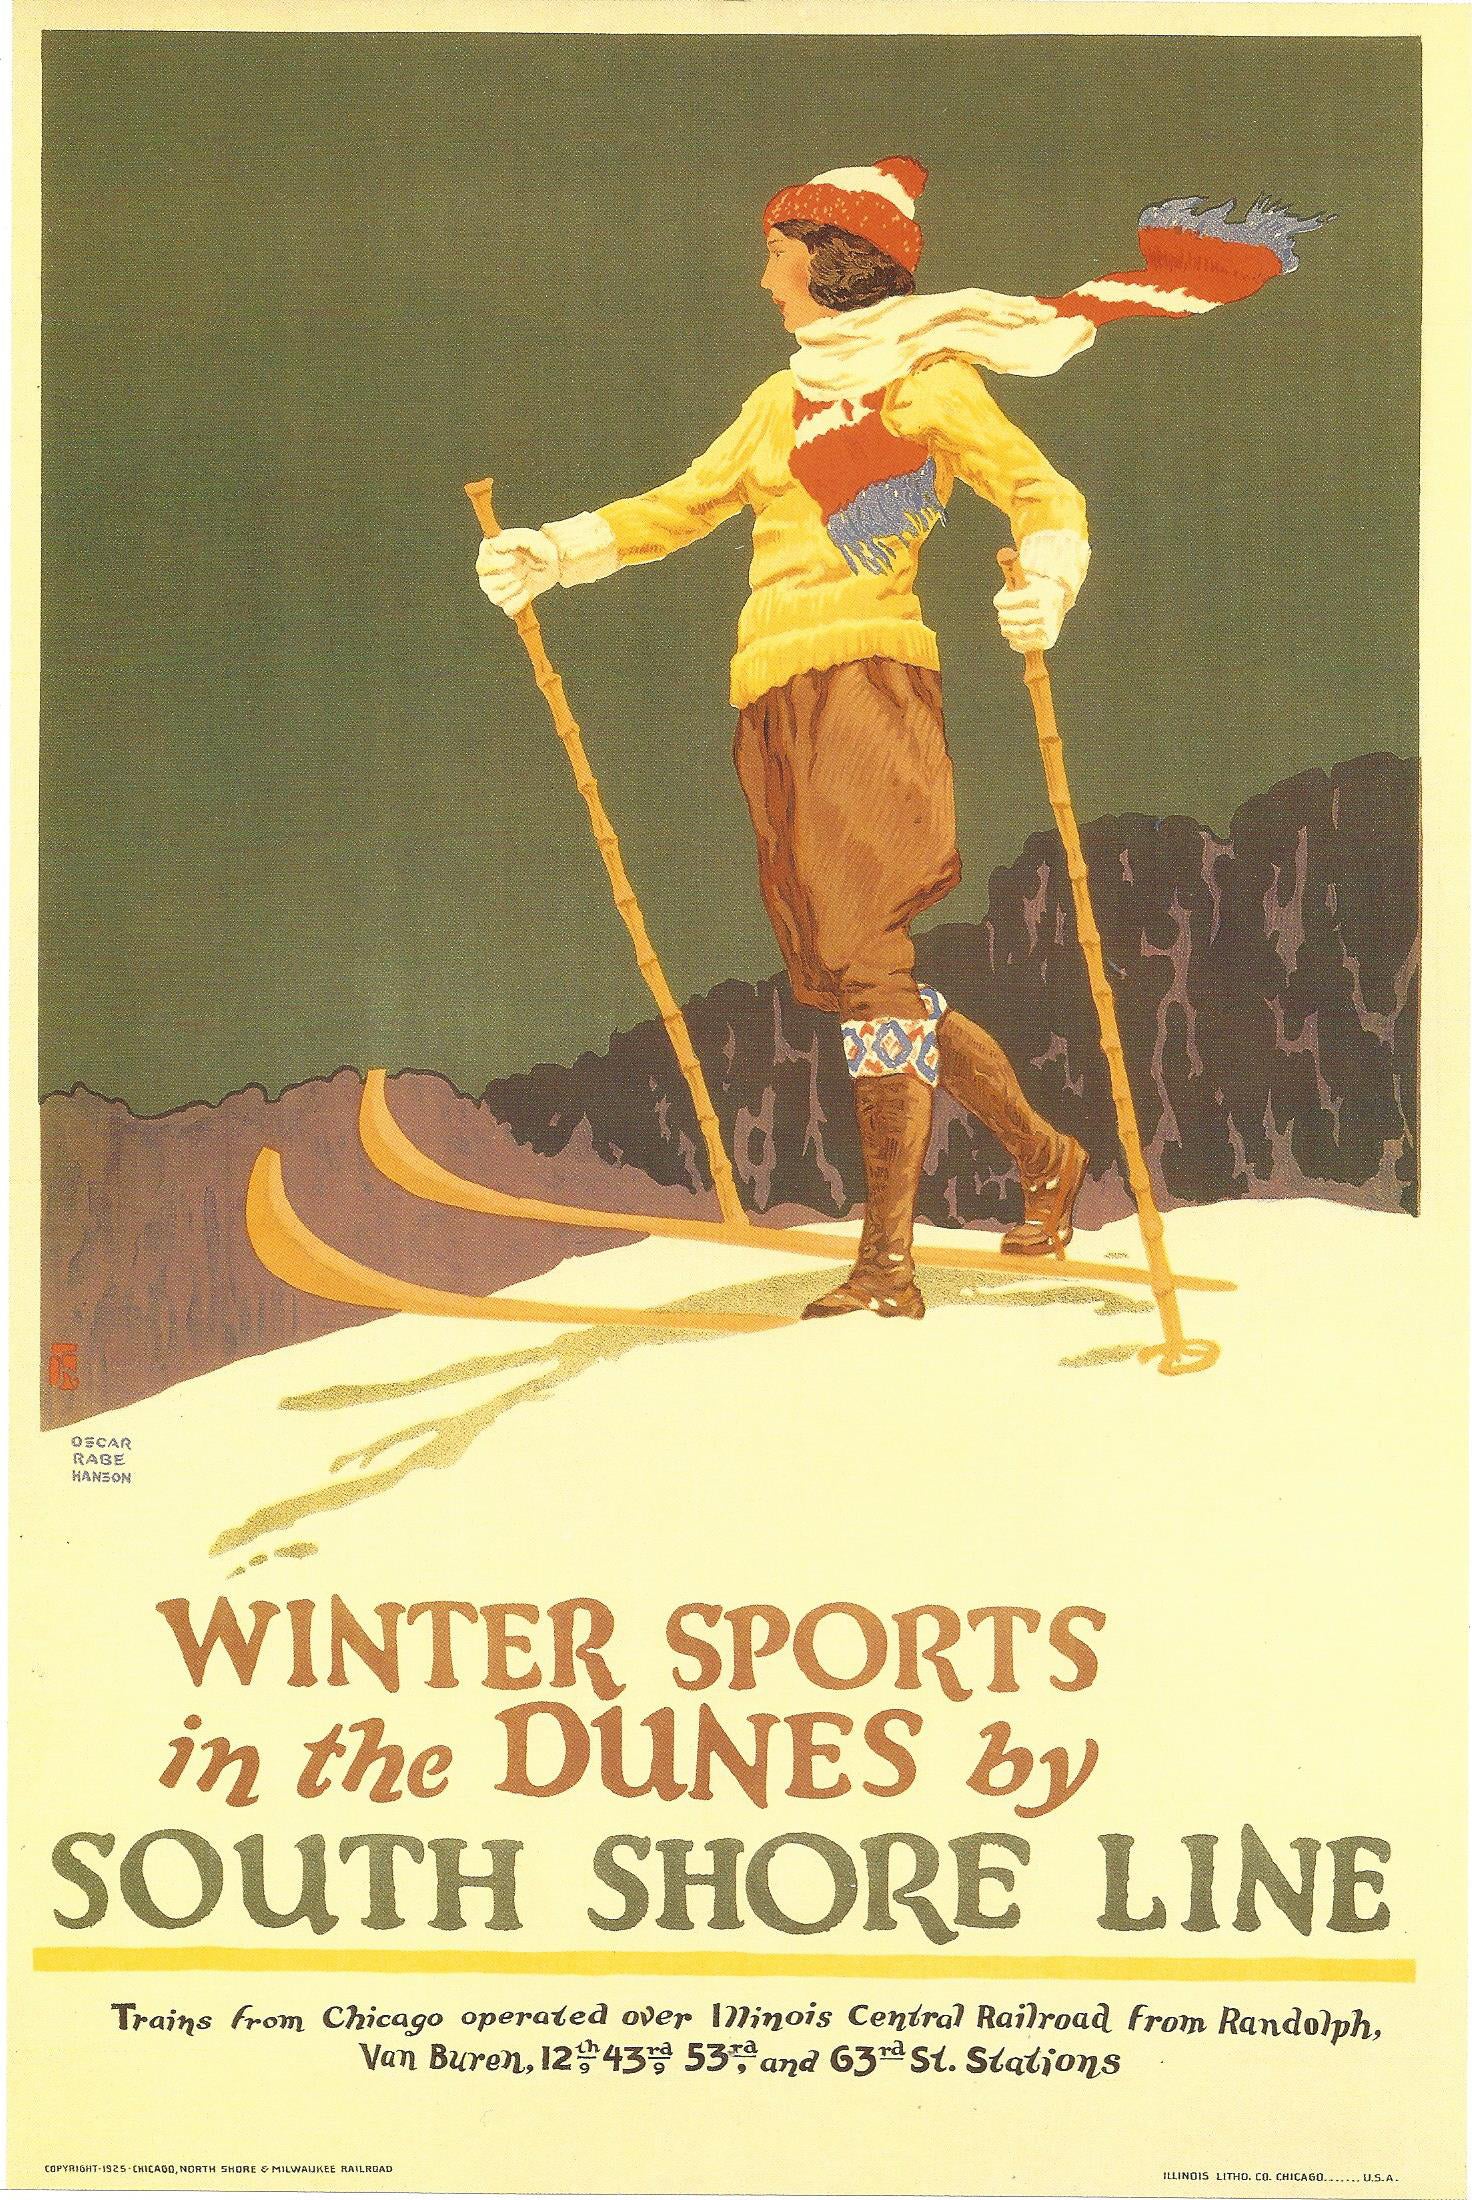 Oscar Rabe Hanson - Winter Sports in the Dunes by the South Shore Line